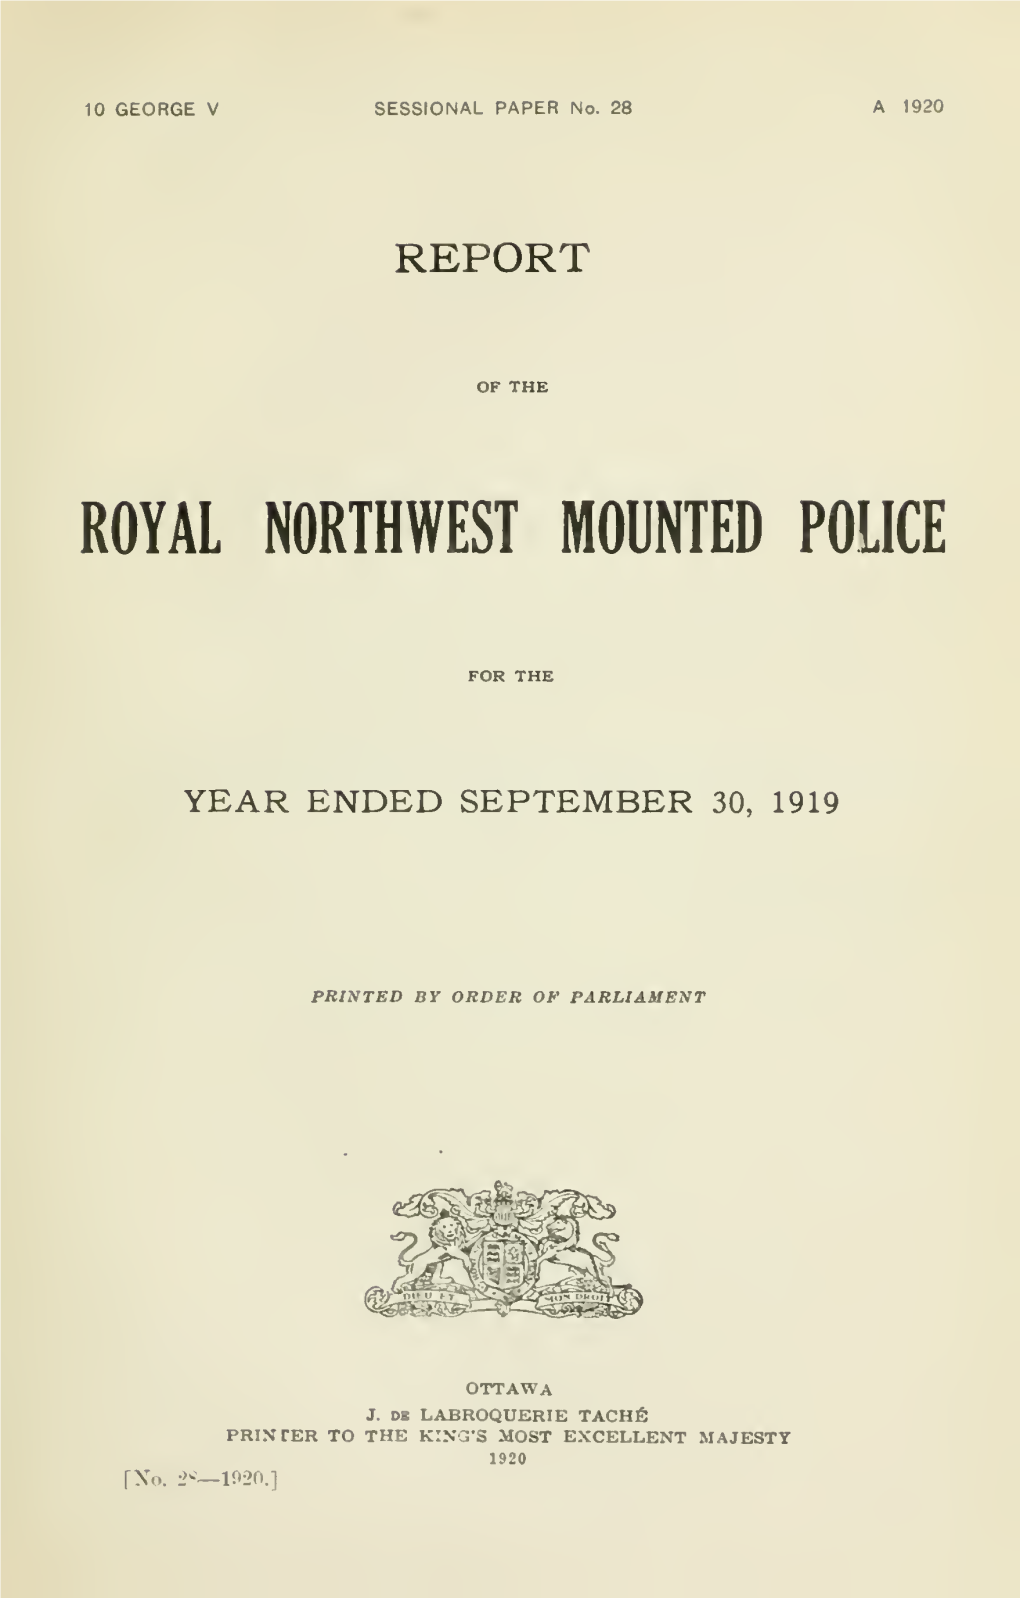 Report of the Royal Northwest Mounted Police for the Year Ended Septemher 30, 101!)